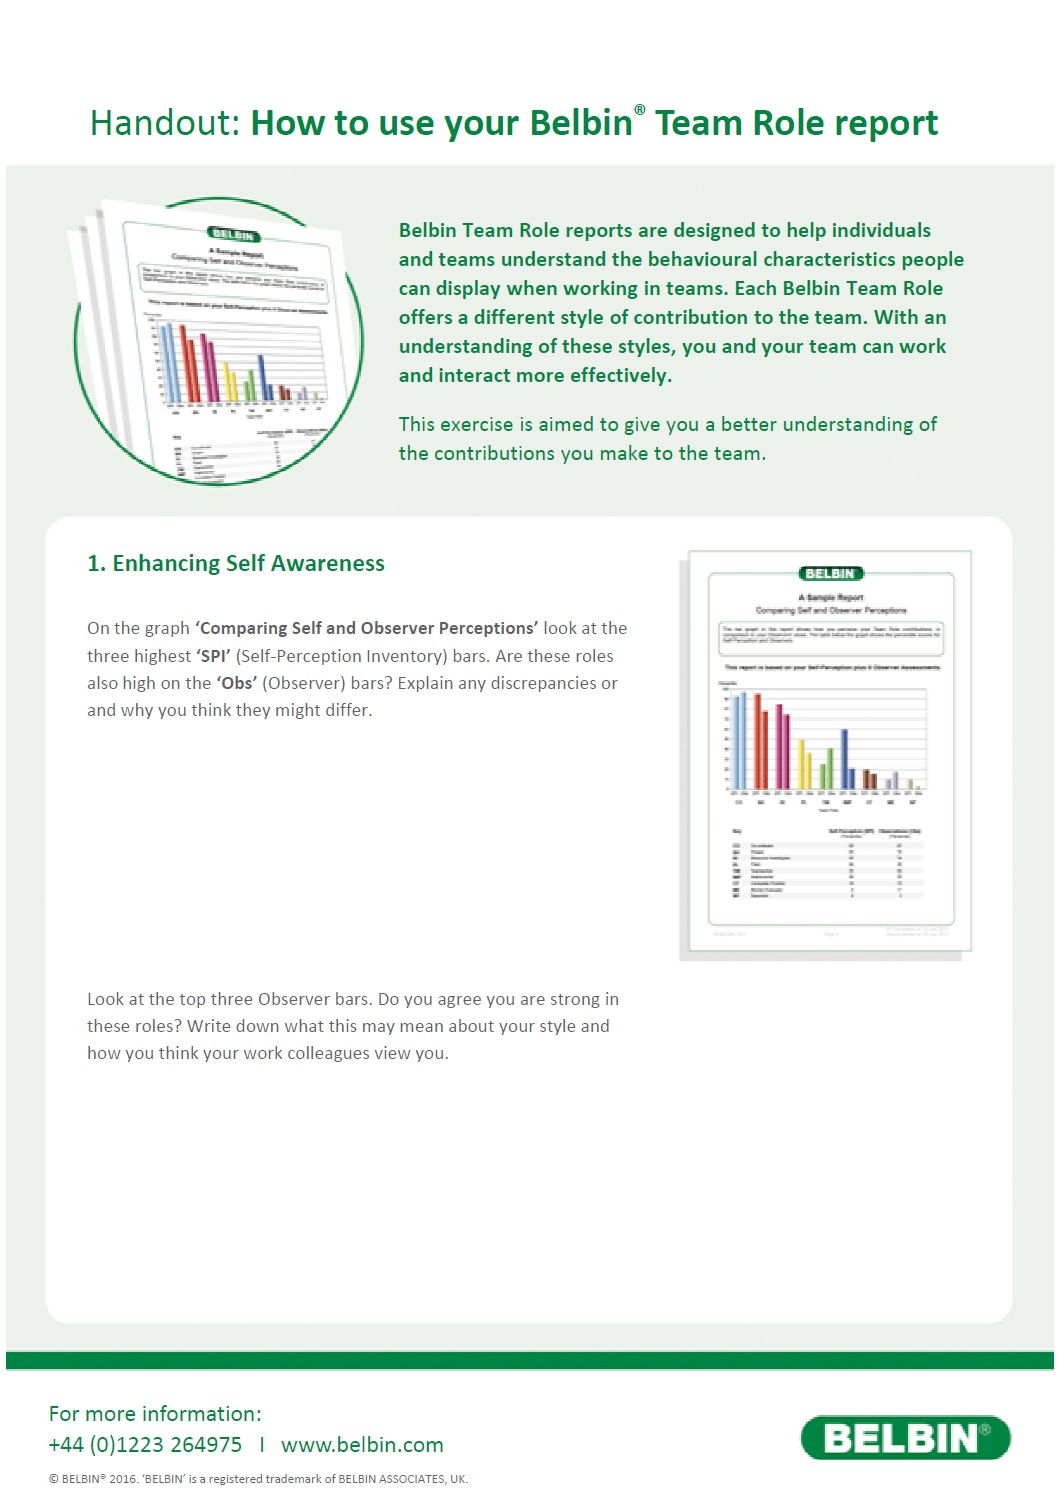 How to use your Belbin Team Role Report first page.jpg